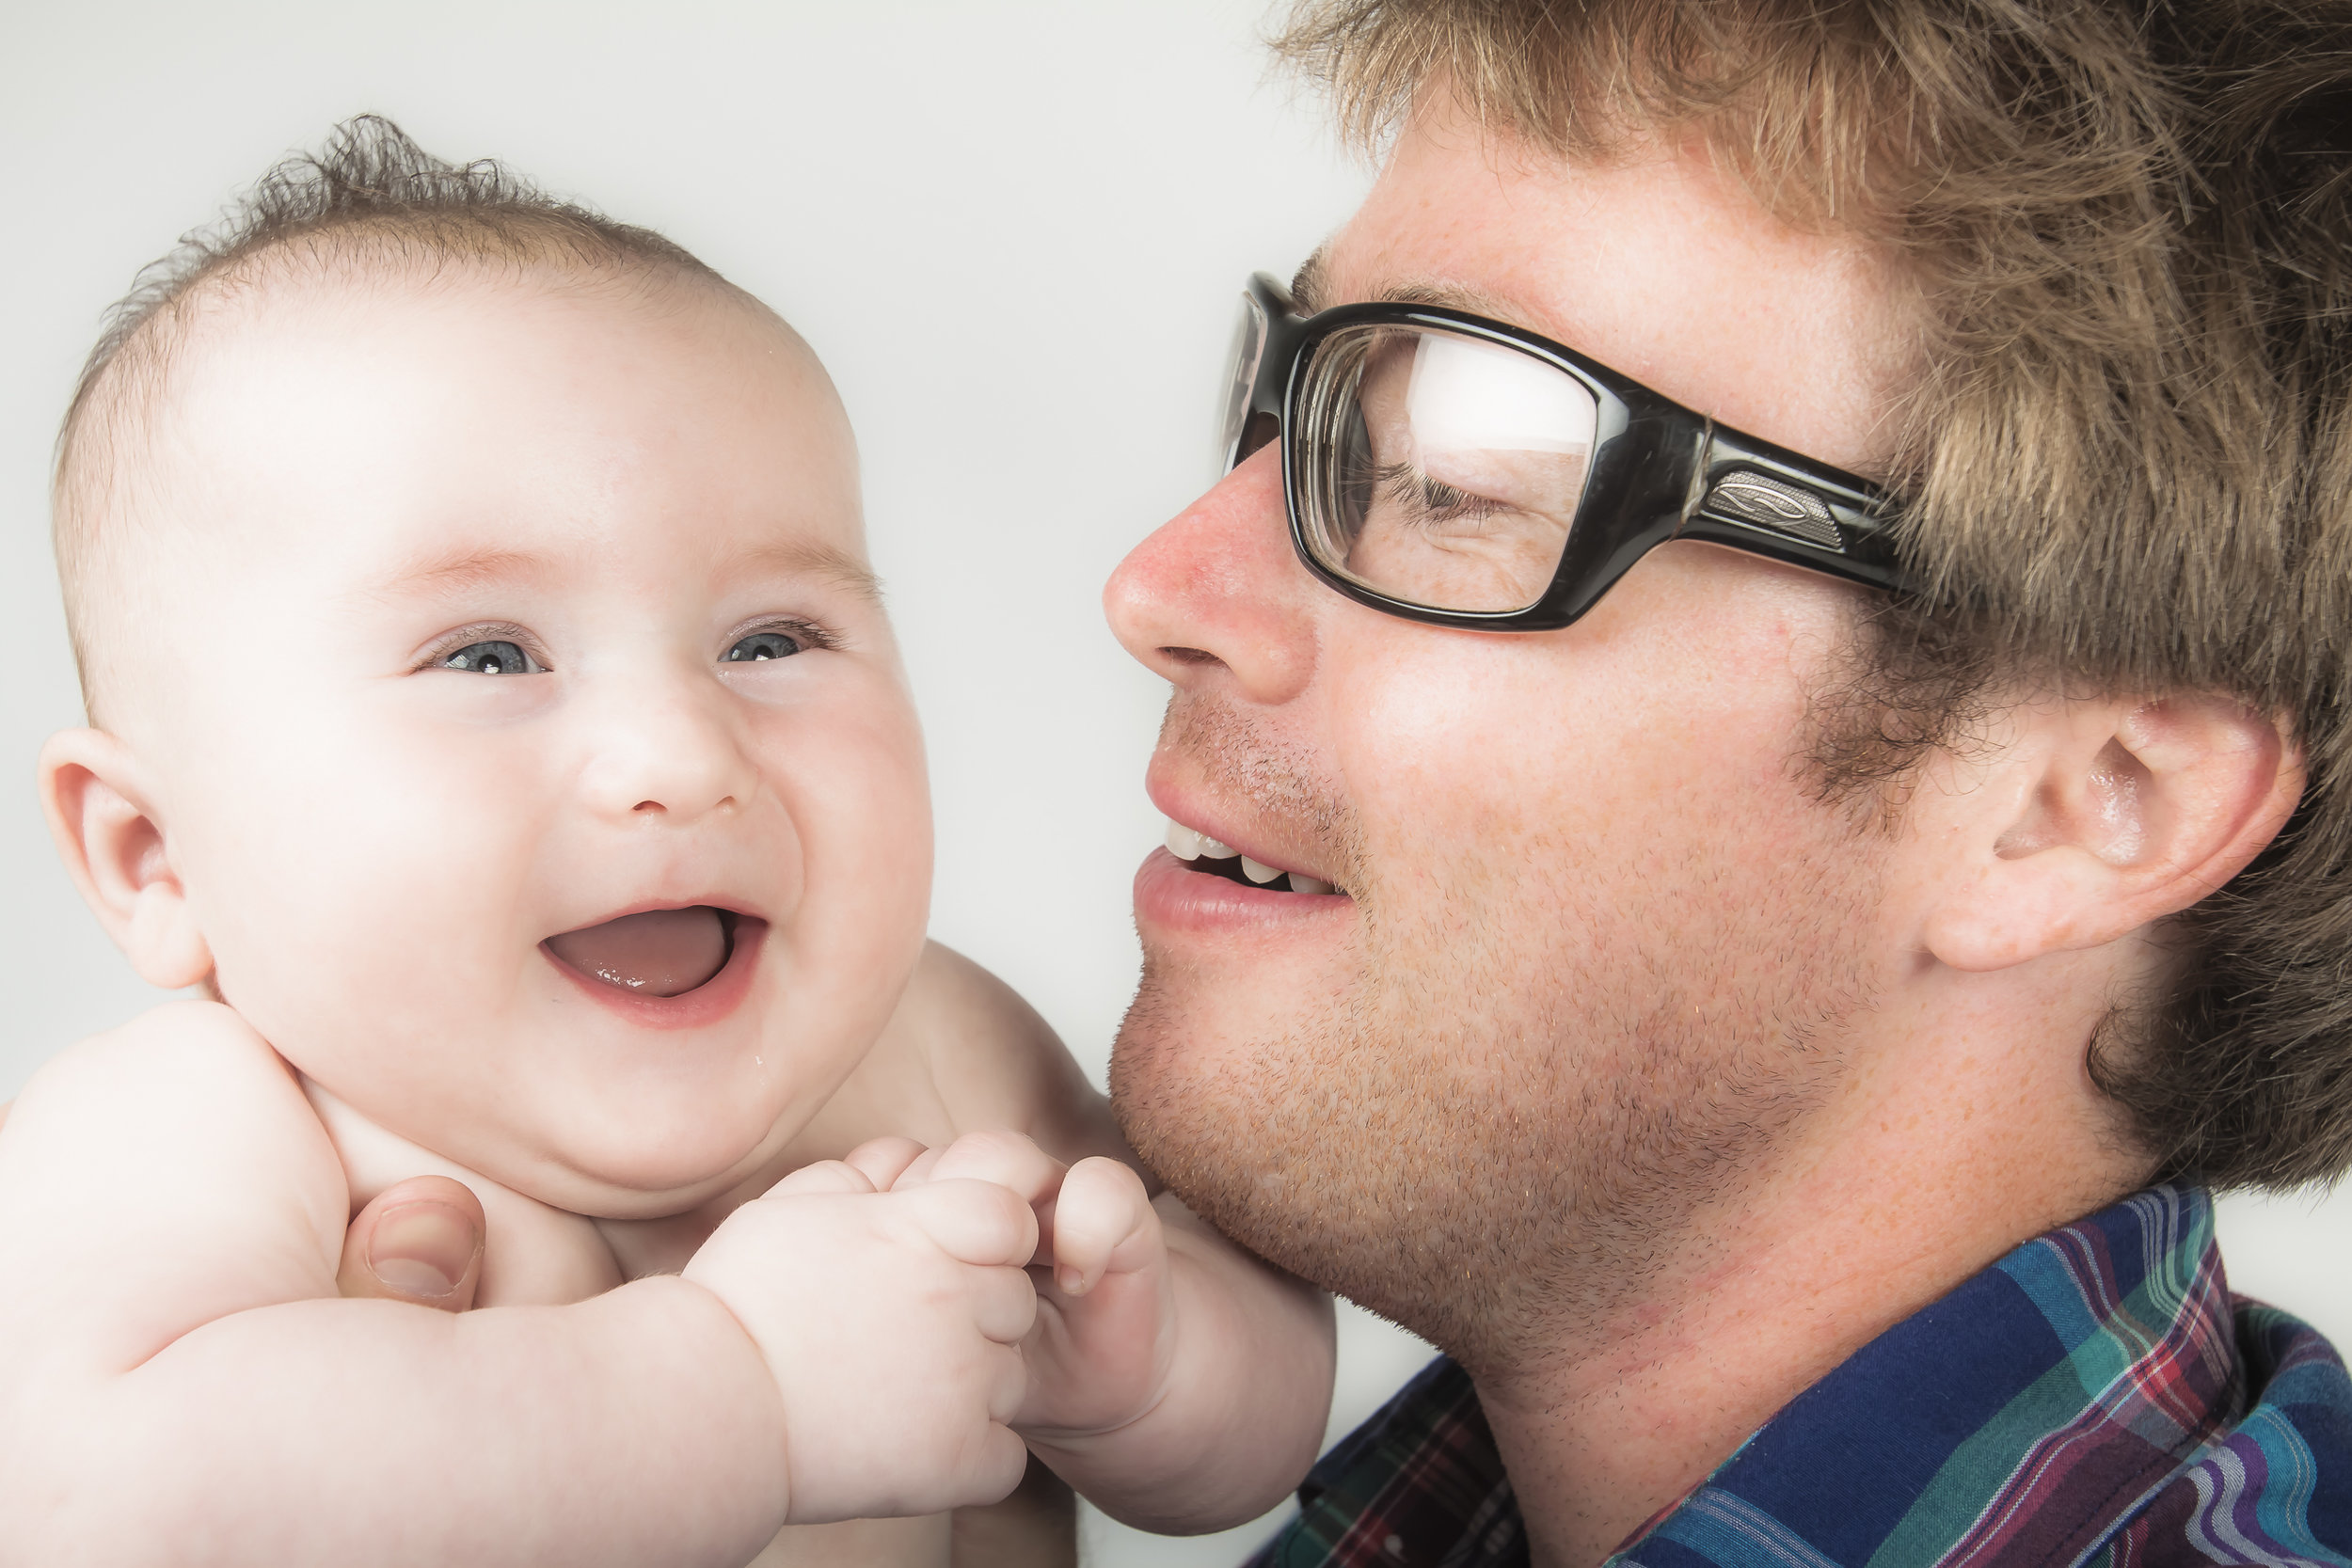 26 happy laughing modern baby with dad studio photography session.jpg